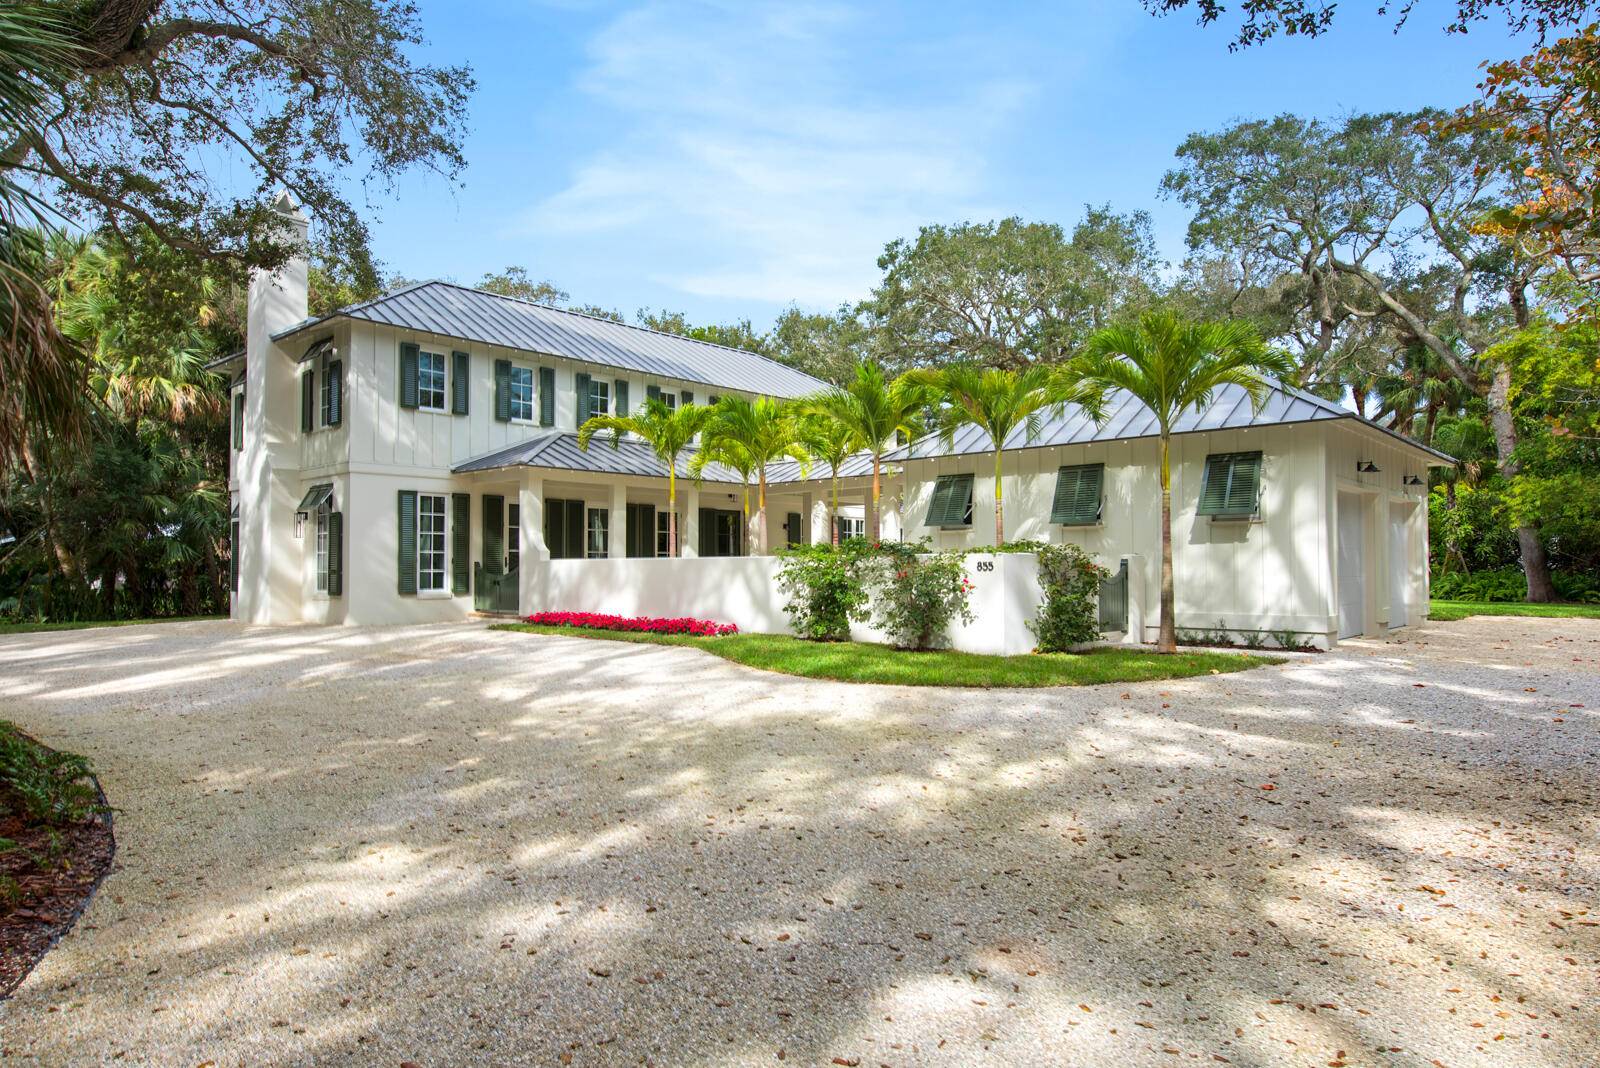 Nestled among ancient live oaks on a sandy lane in old Riomar, is a simply exceptional new build, designed by Peter Moor of Moor, Baker Associates Architect 2022 Palladio Award ...